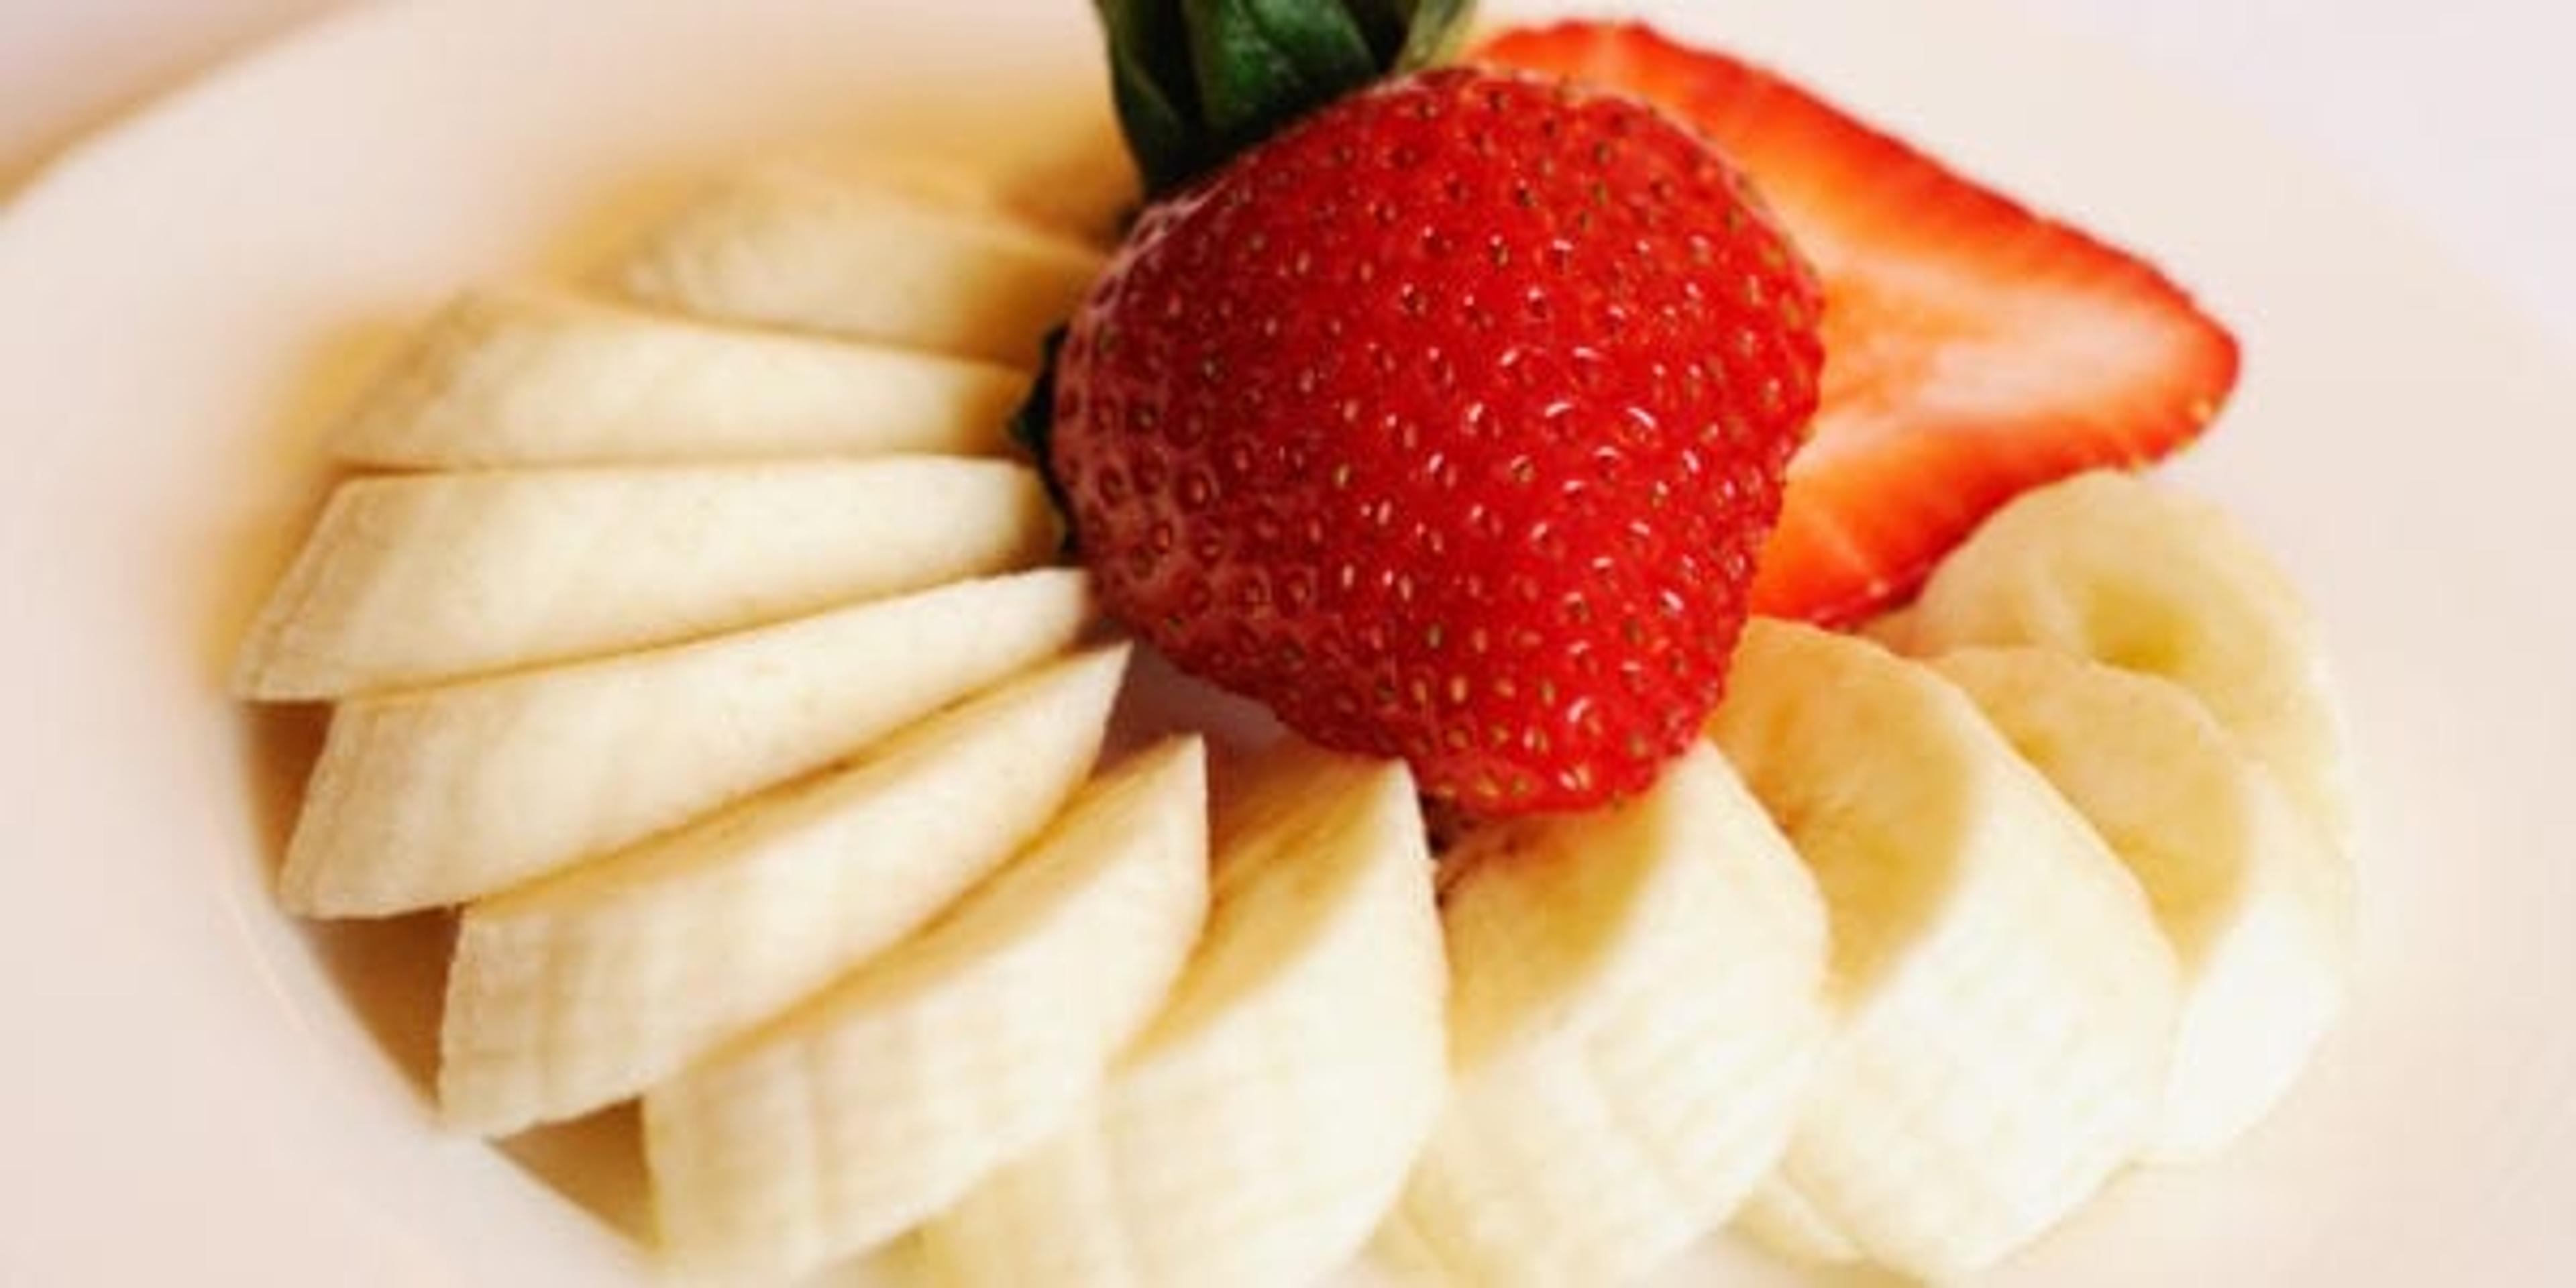 plate of strawberries and bananas